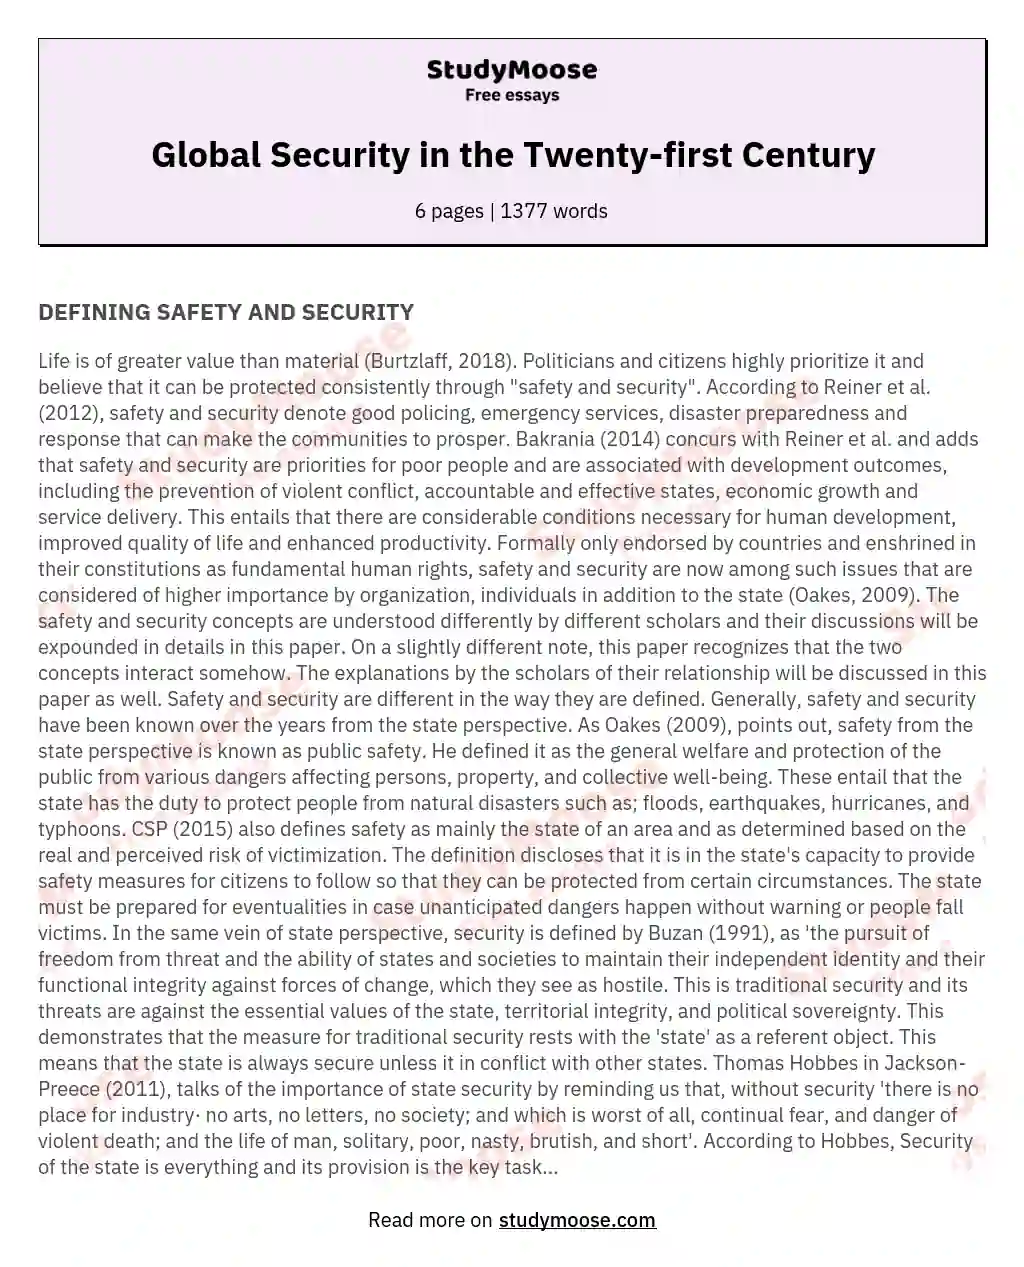 Global Security in the Twenty-first Century essay